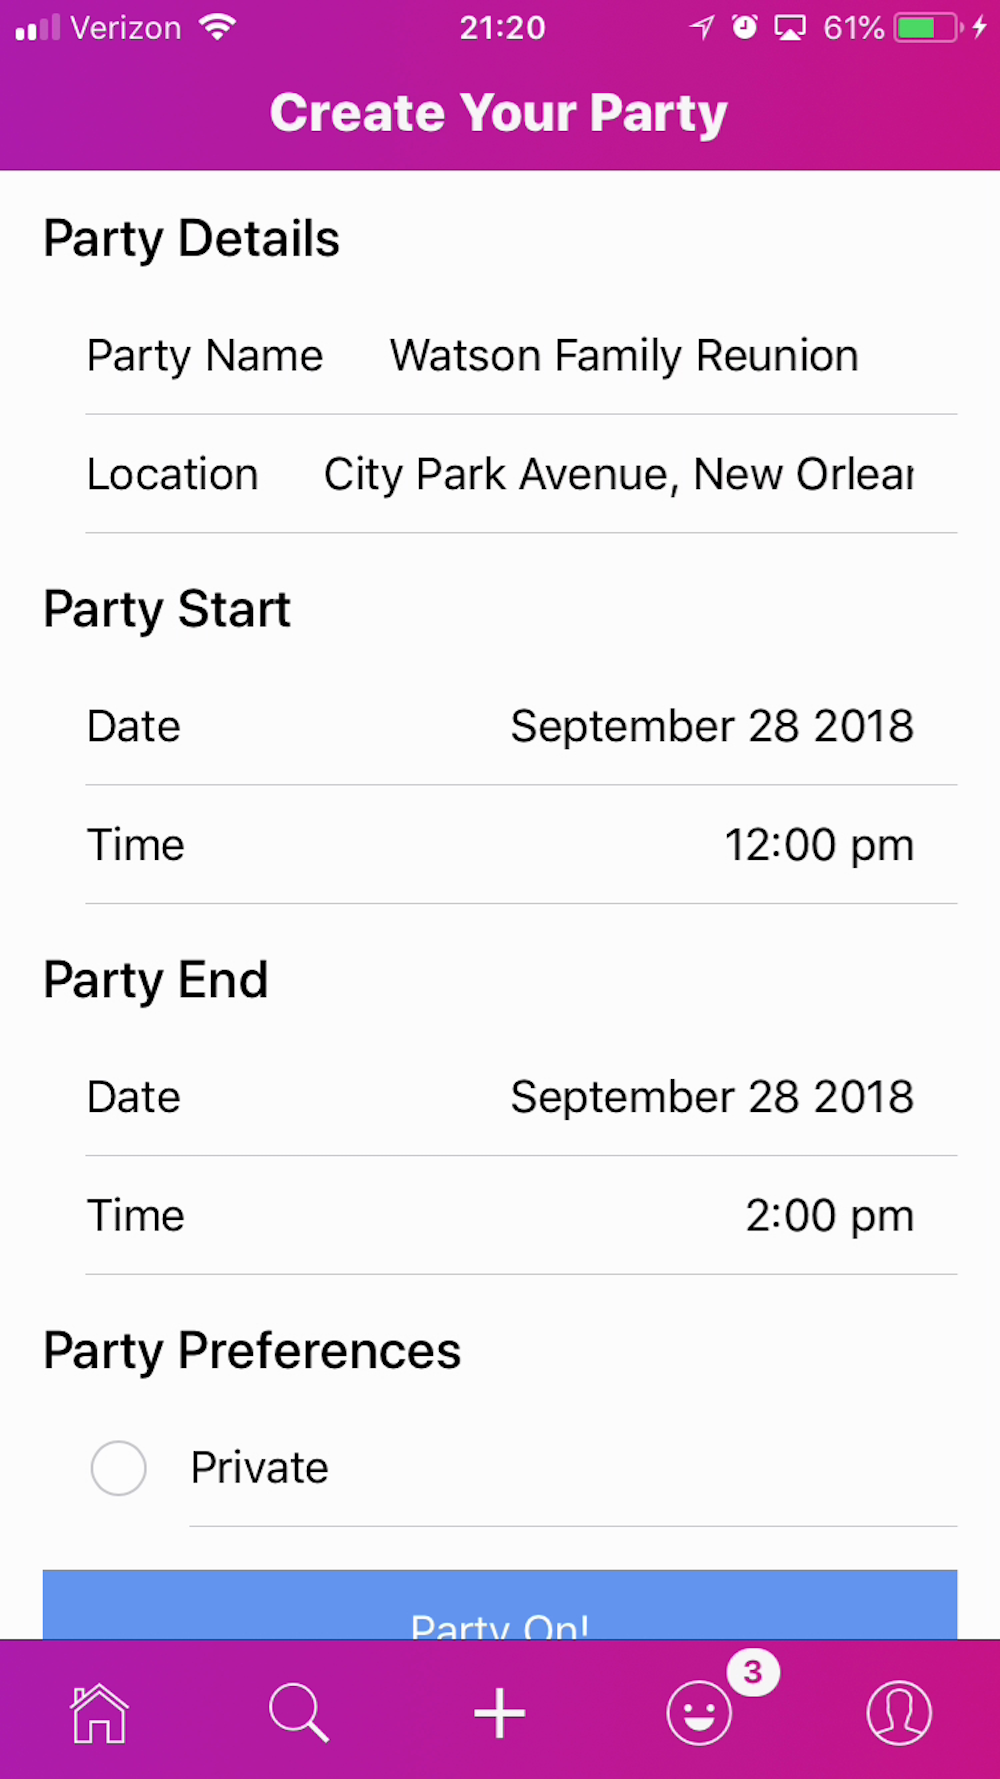 The create party form which asks for the name, location, start time, and end time.